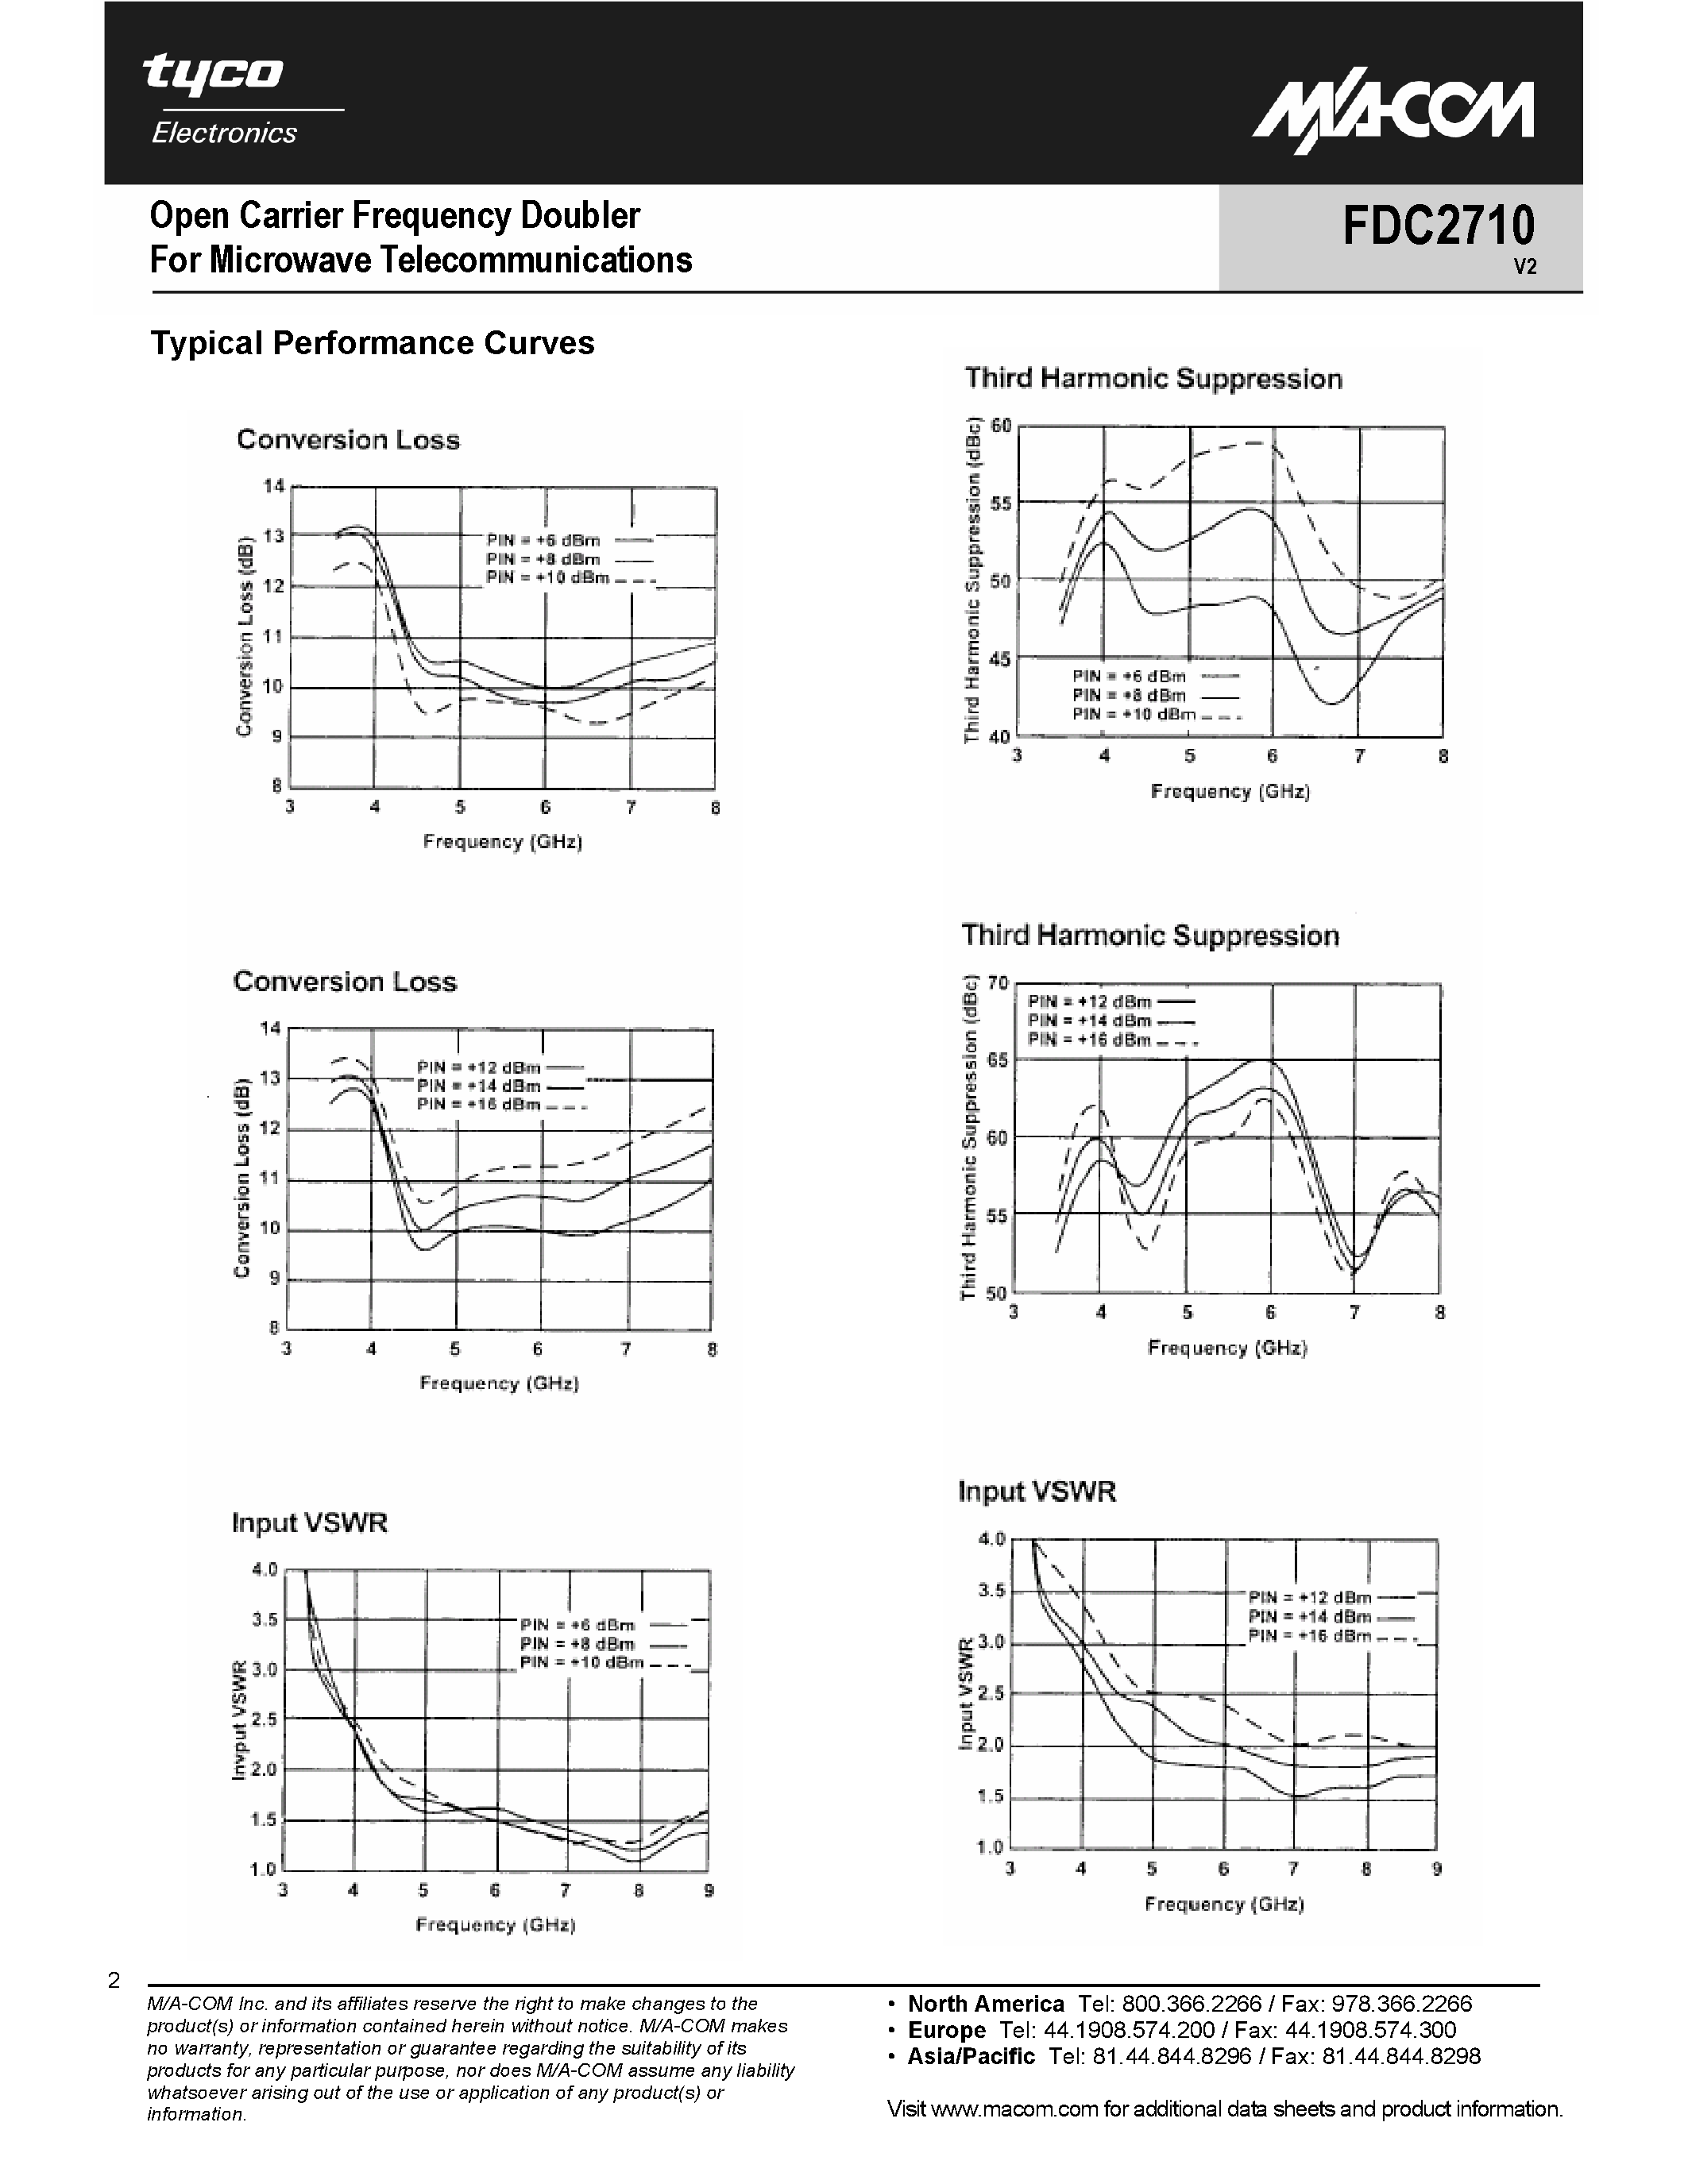 Datasheet FDC2710 - Open Carrier Frequency Doubler page 2